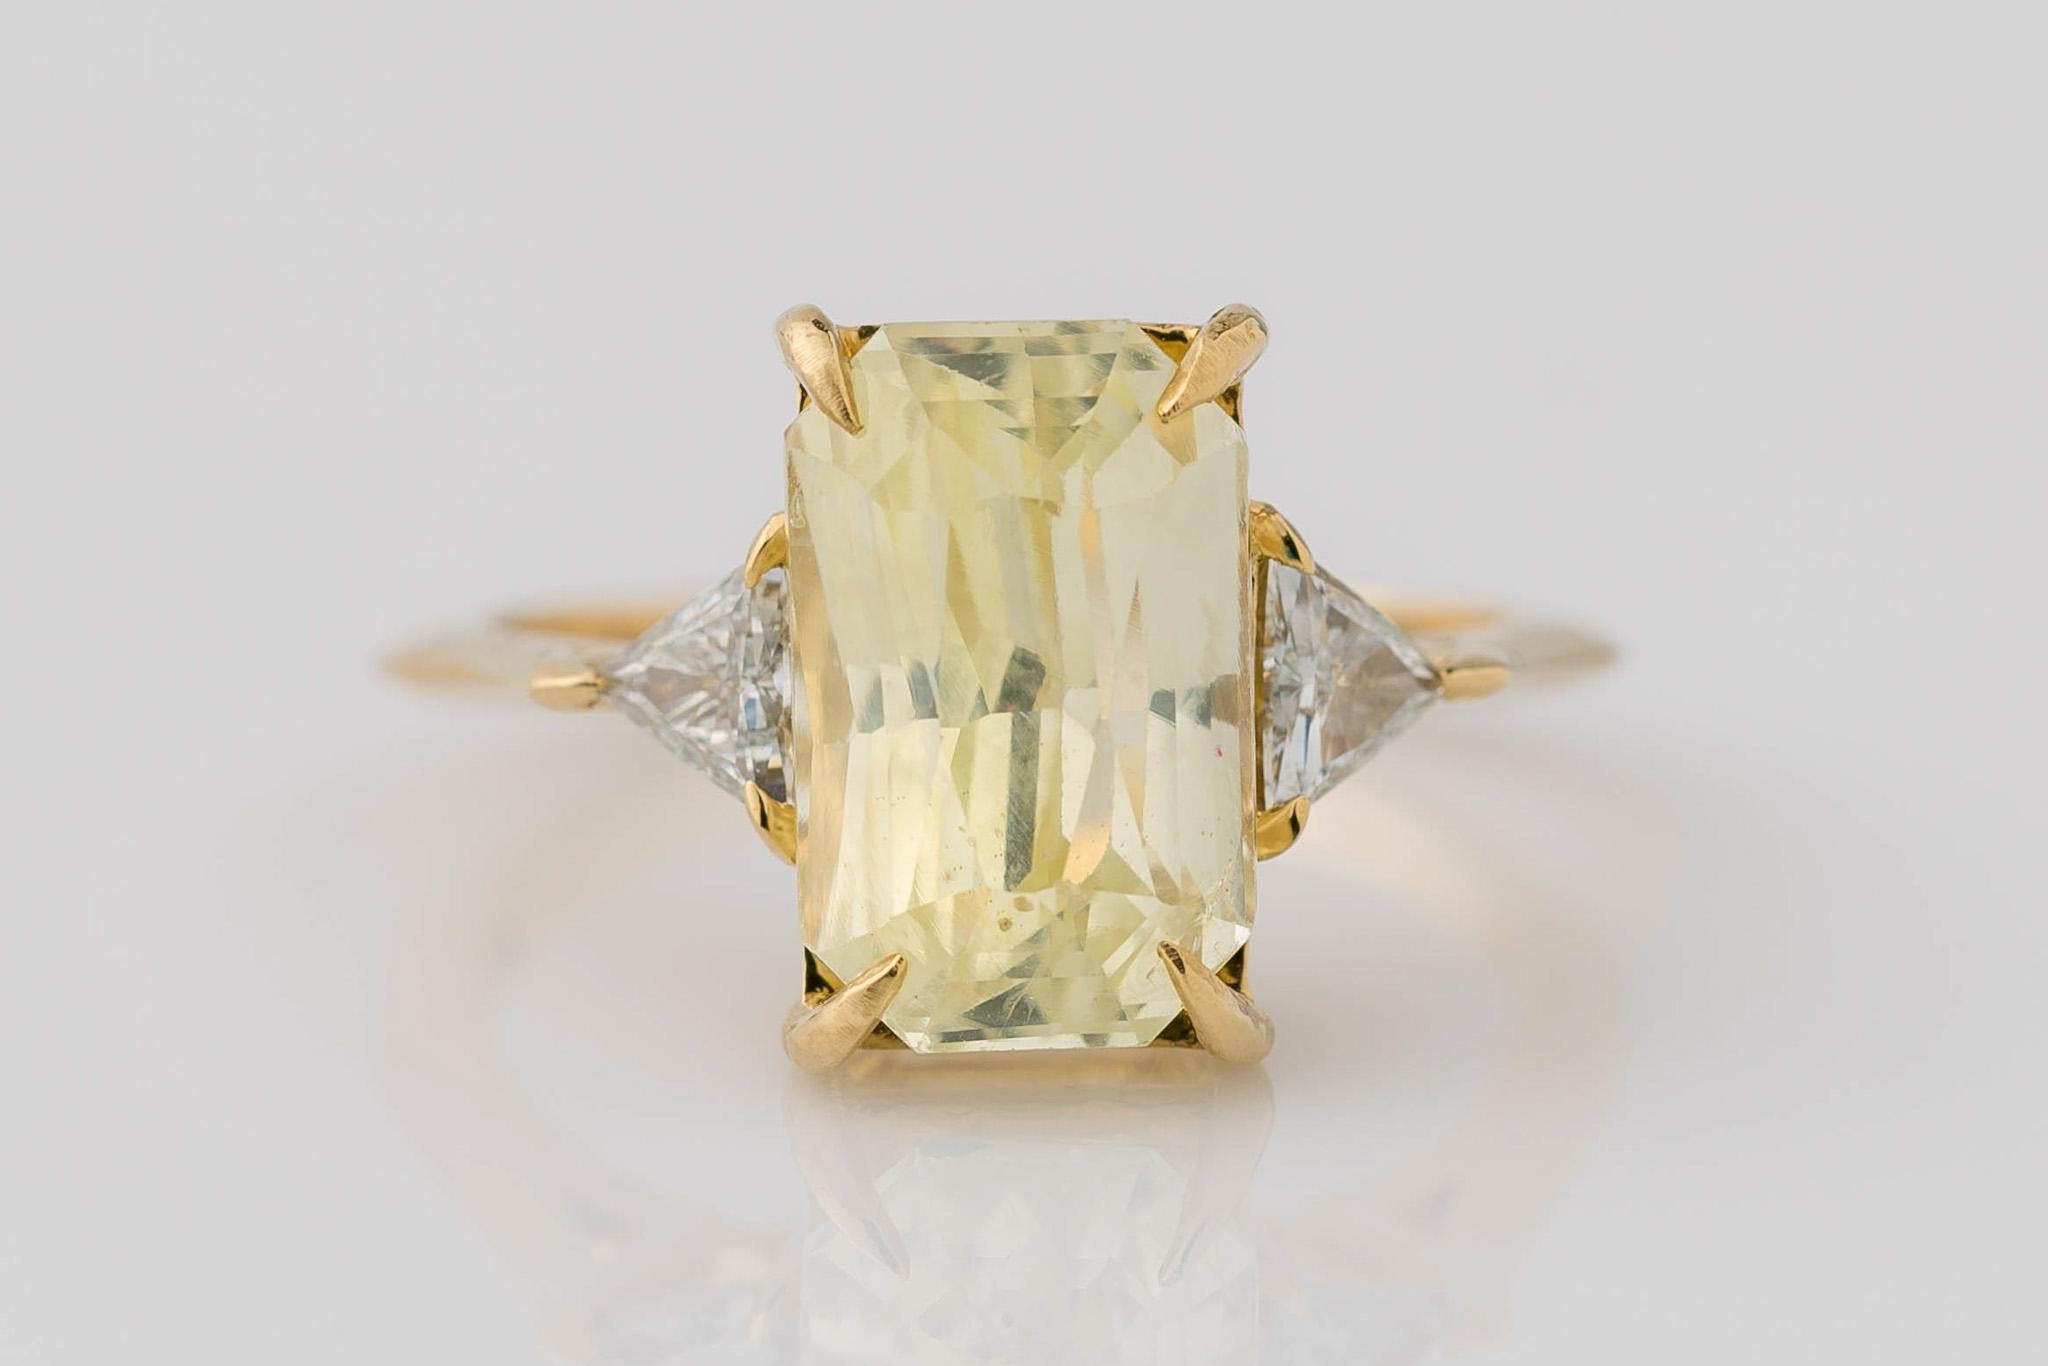 Experience unparalleled elegance with our 18K yellow gold 3-stone radiant cut yellow sapphire diamond ring. The centerpiece, a completely natural and rare unheated sapphire weighing 4.73 carats, features a captivating light-yellow hue and measures